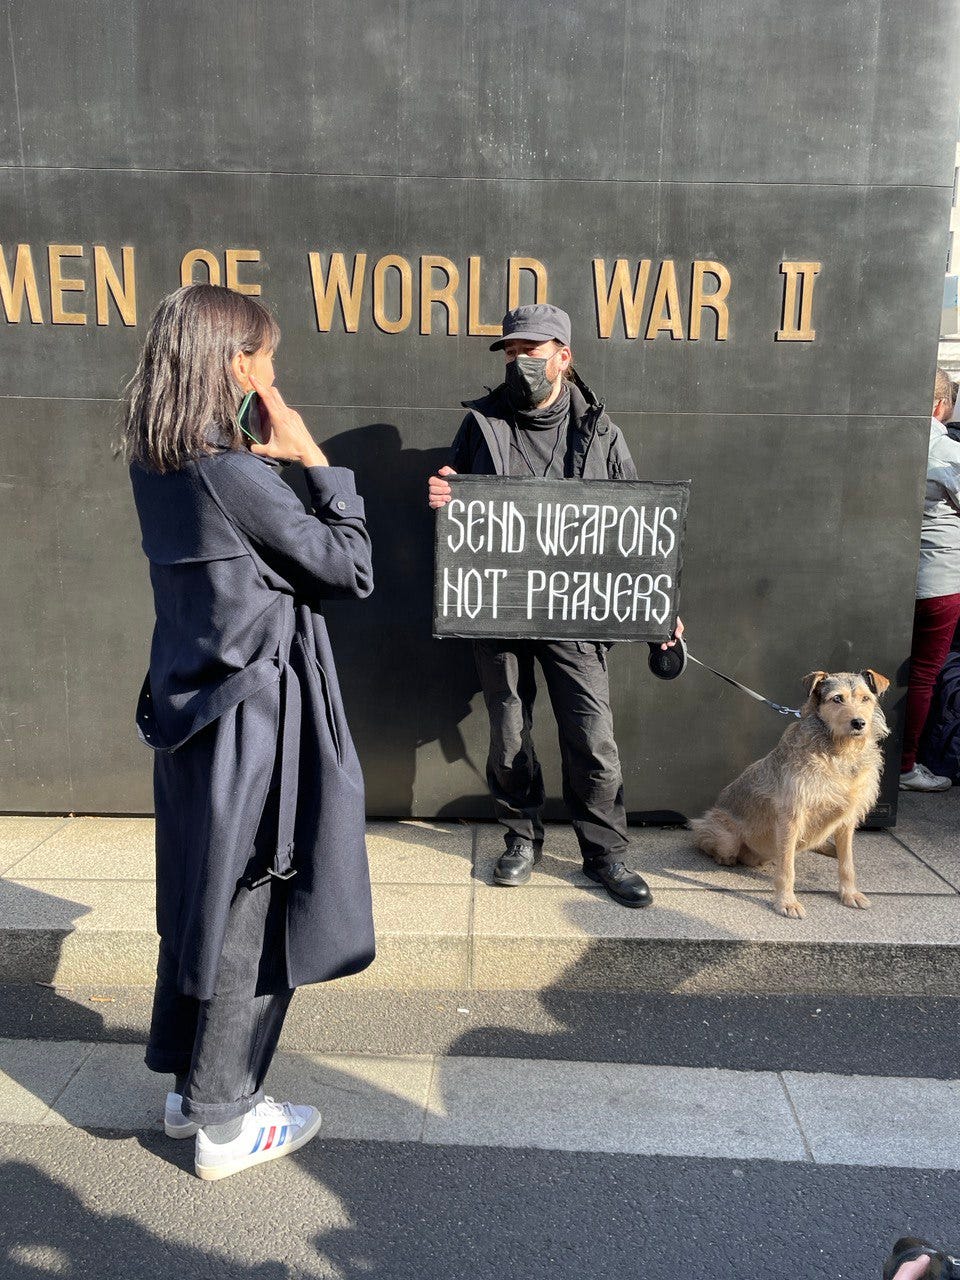 A man protesting in London, UK. His banner says “Send weapons, not prayers”